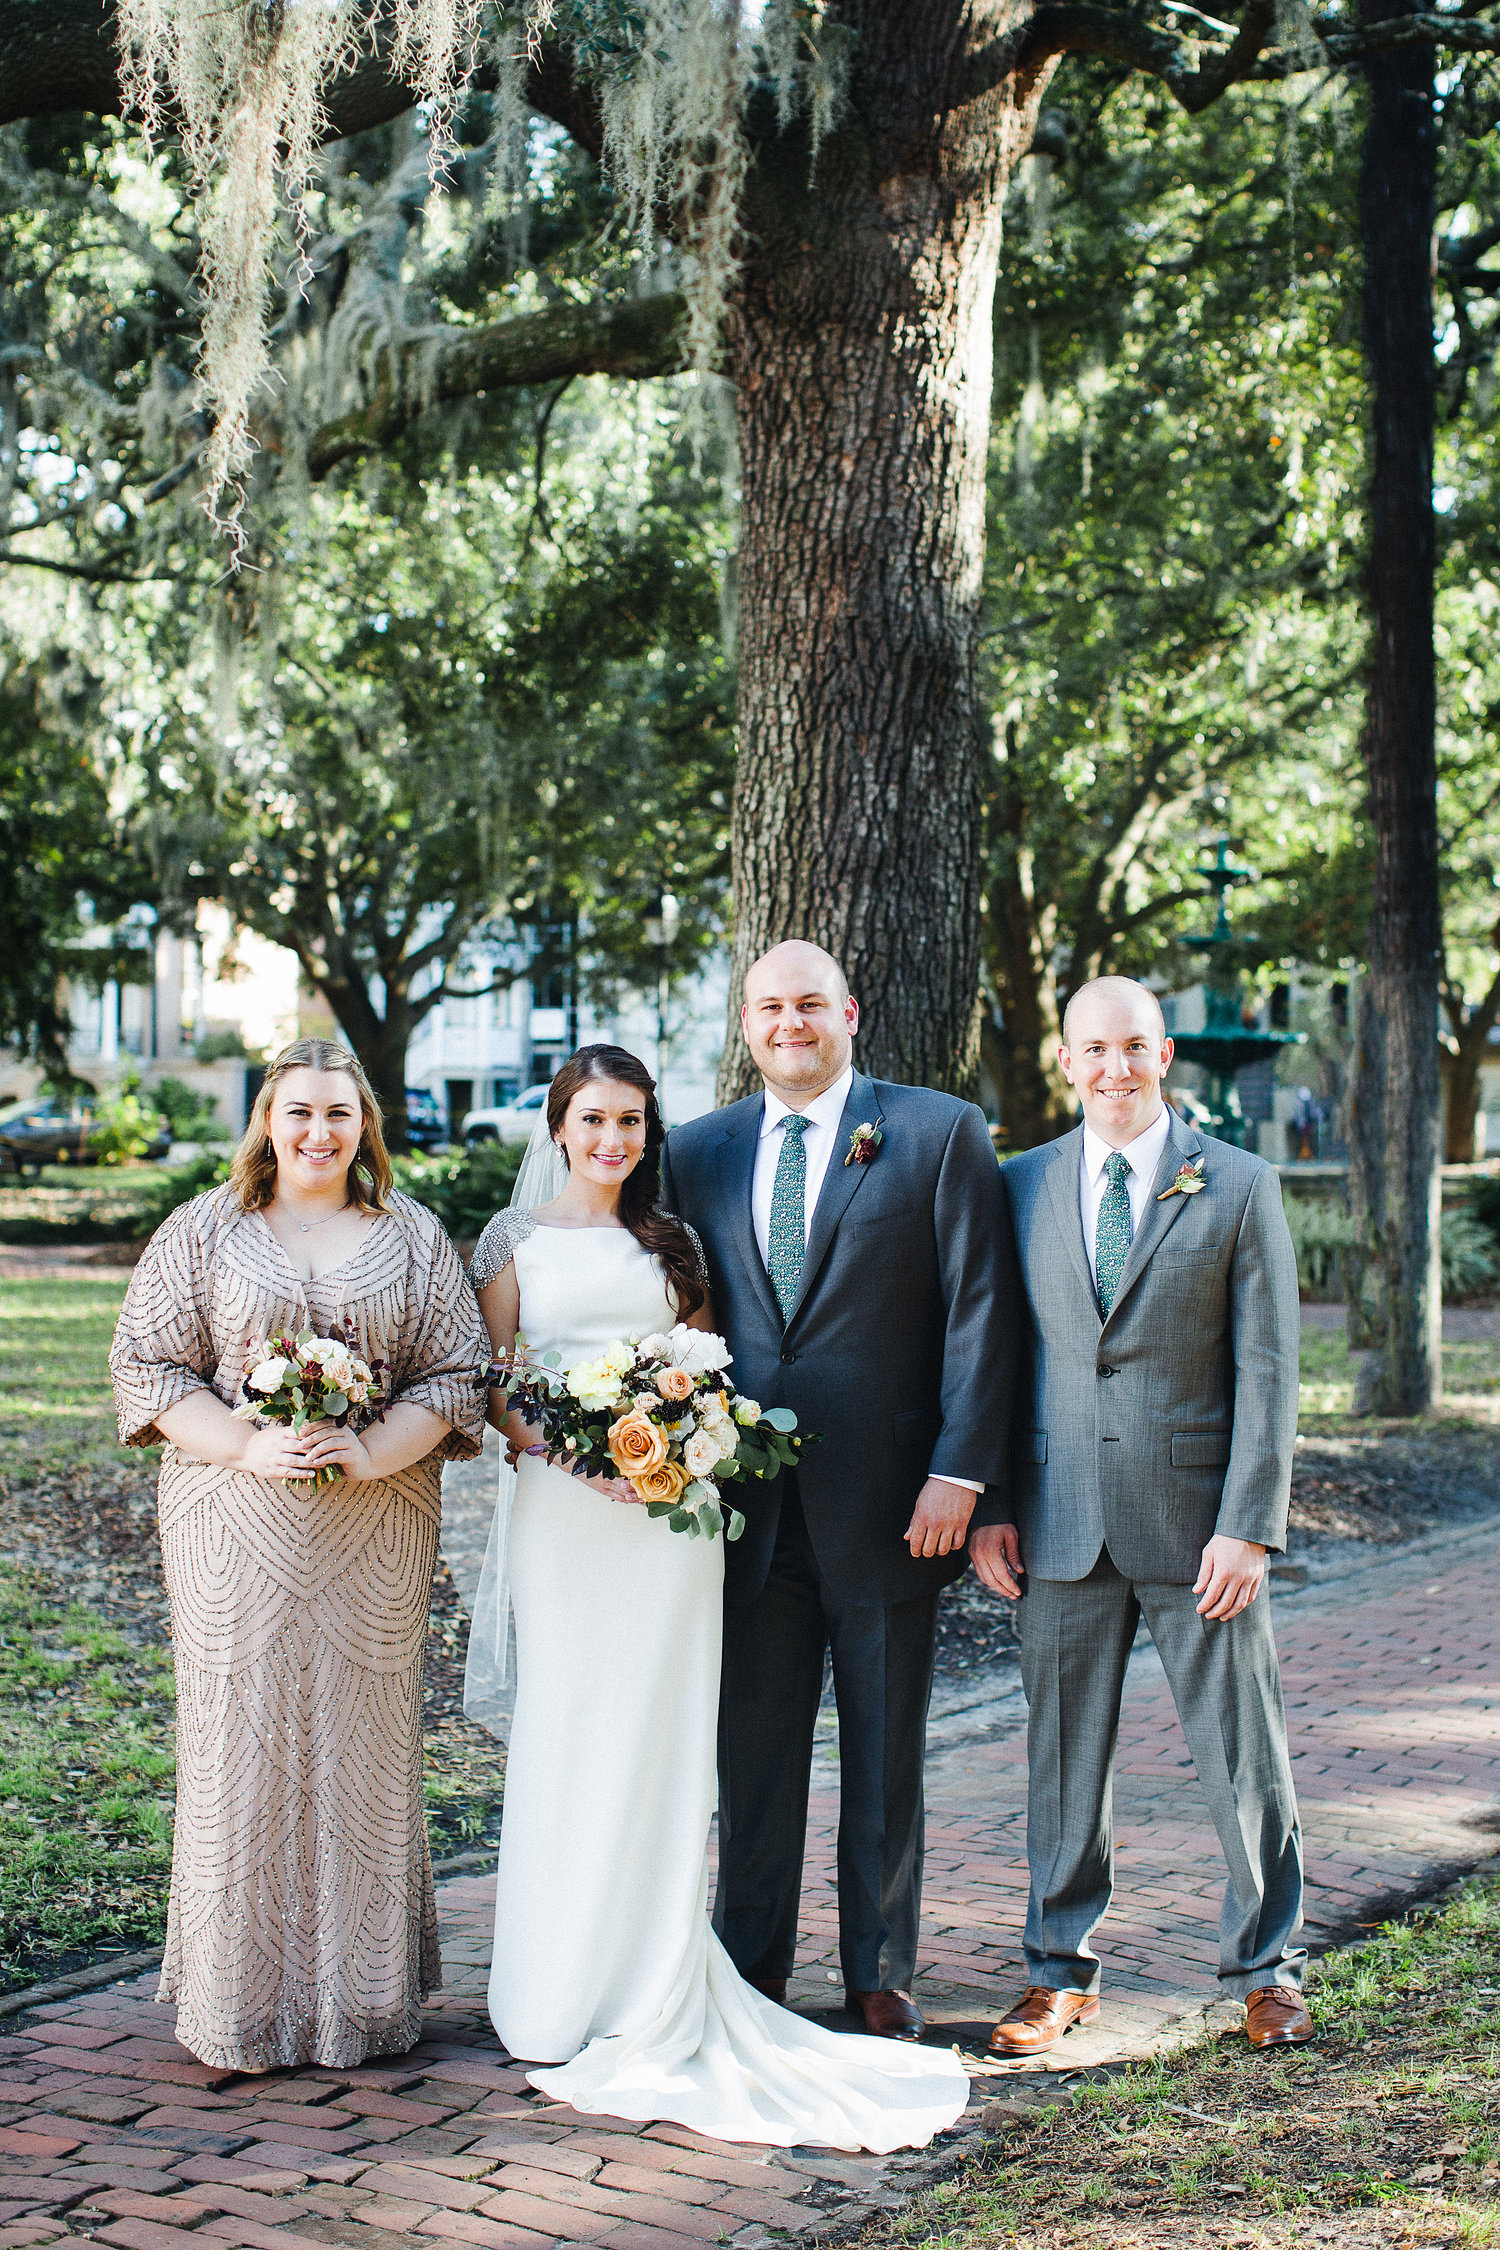 izzy-hudgins-photography-savannah-wedding-ivory-and-beau-bridal-boutique-savannah-wedding-planner-colonial-house-of-flowers-forsyth-park-wedding-old-fort-jackson-wedding-squidwed-films-savannah-boutique-savannah-weddings-23.jpg